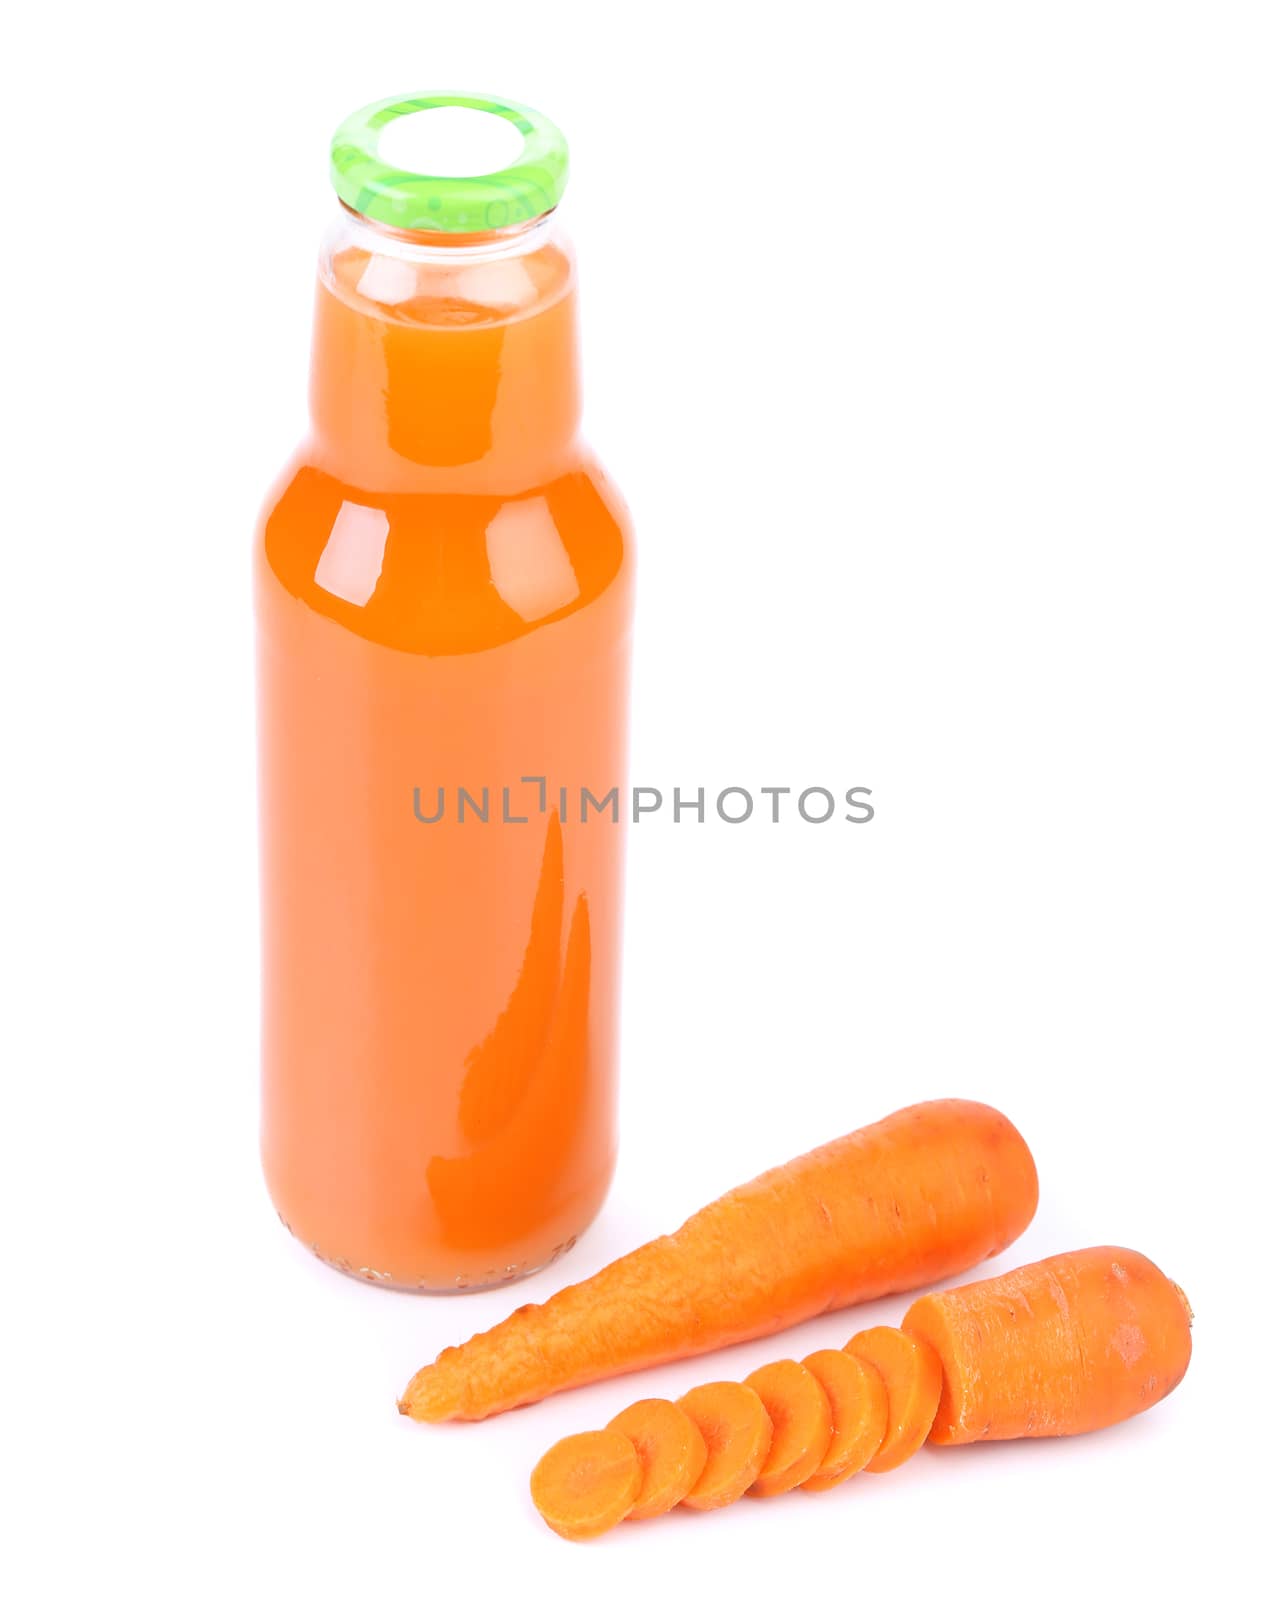 Slices raw carrot and juice. Close up. White background.